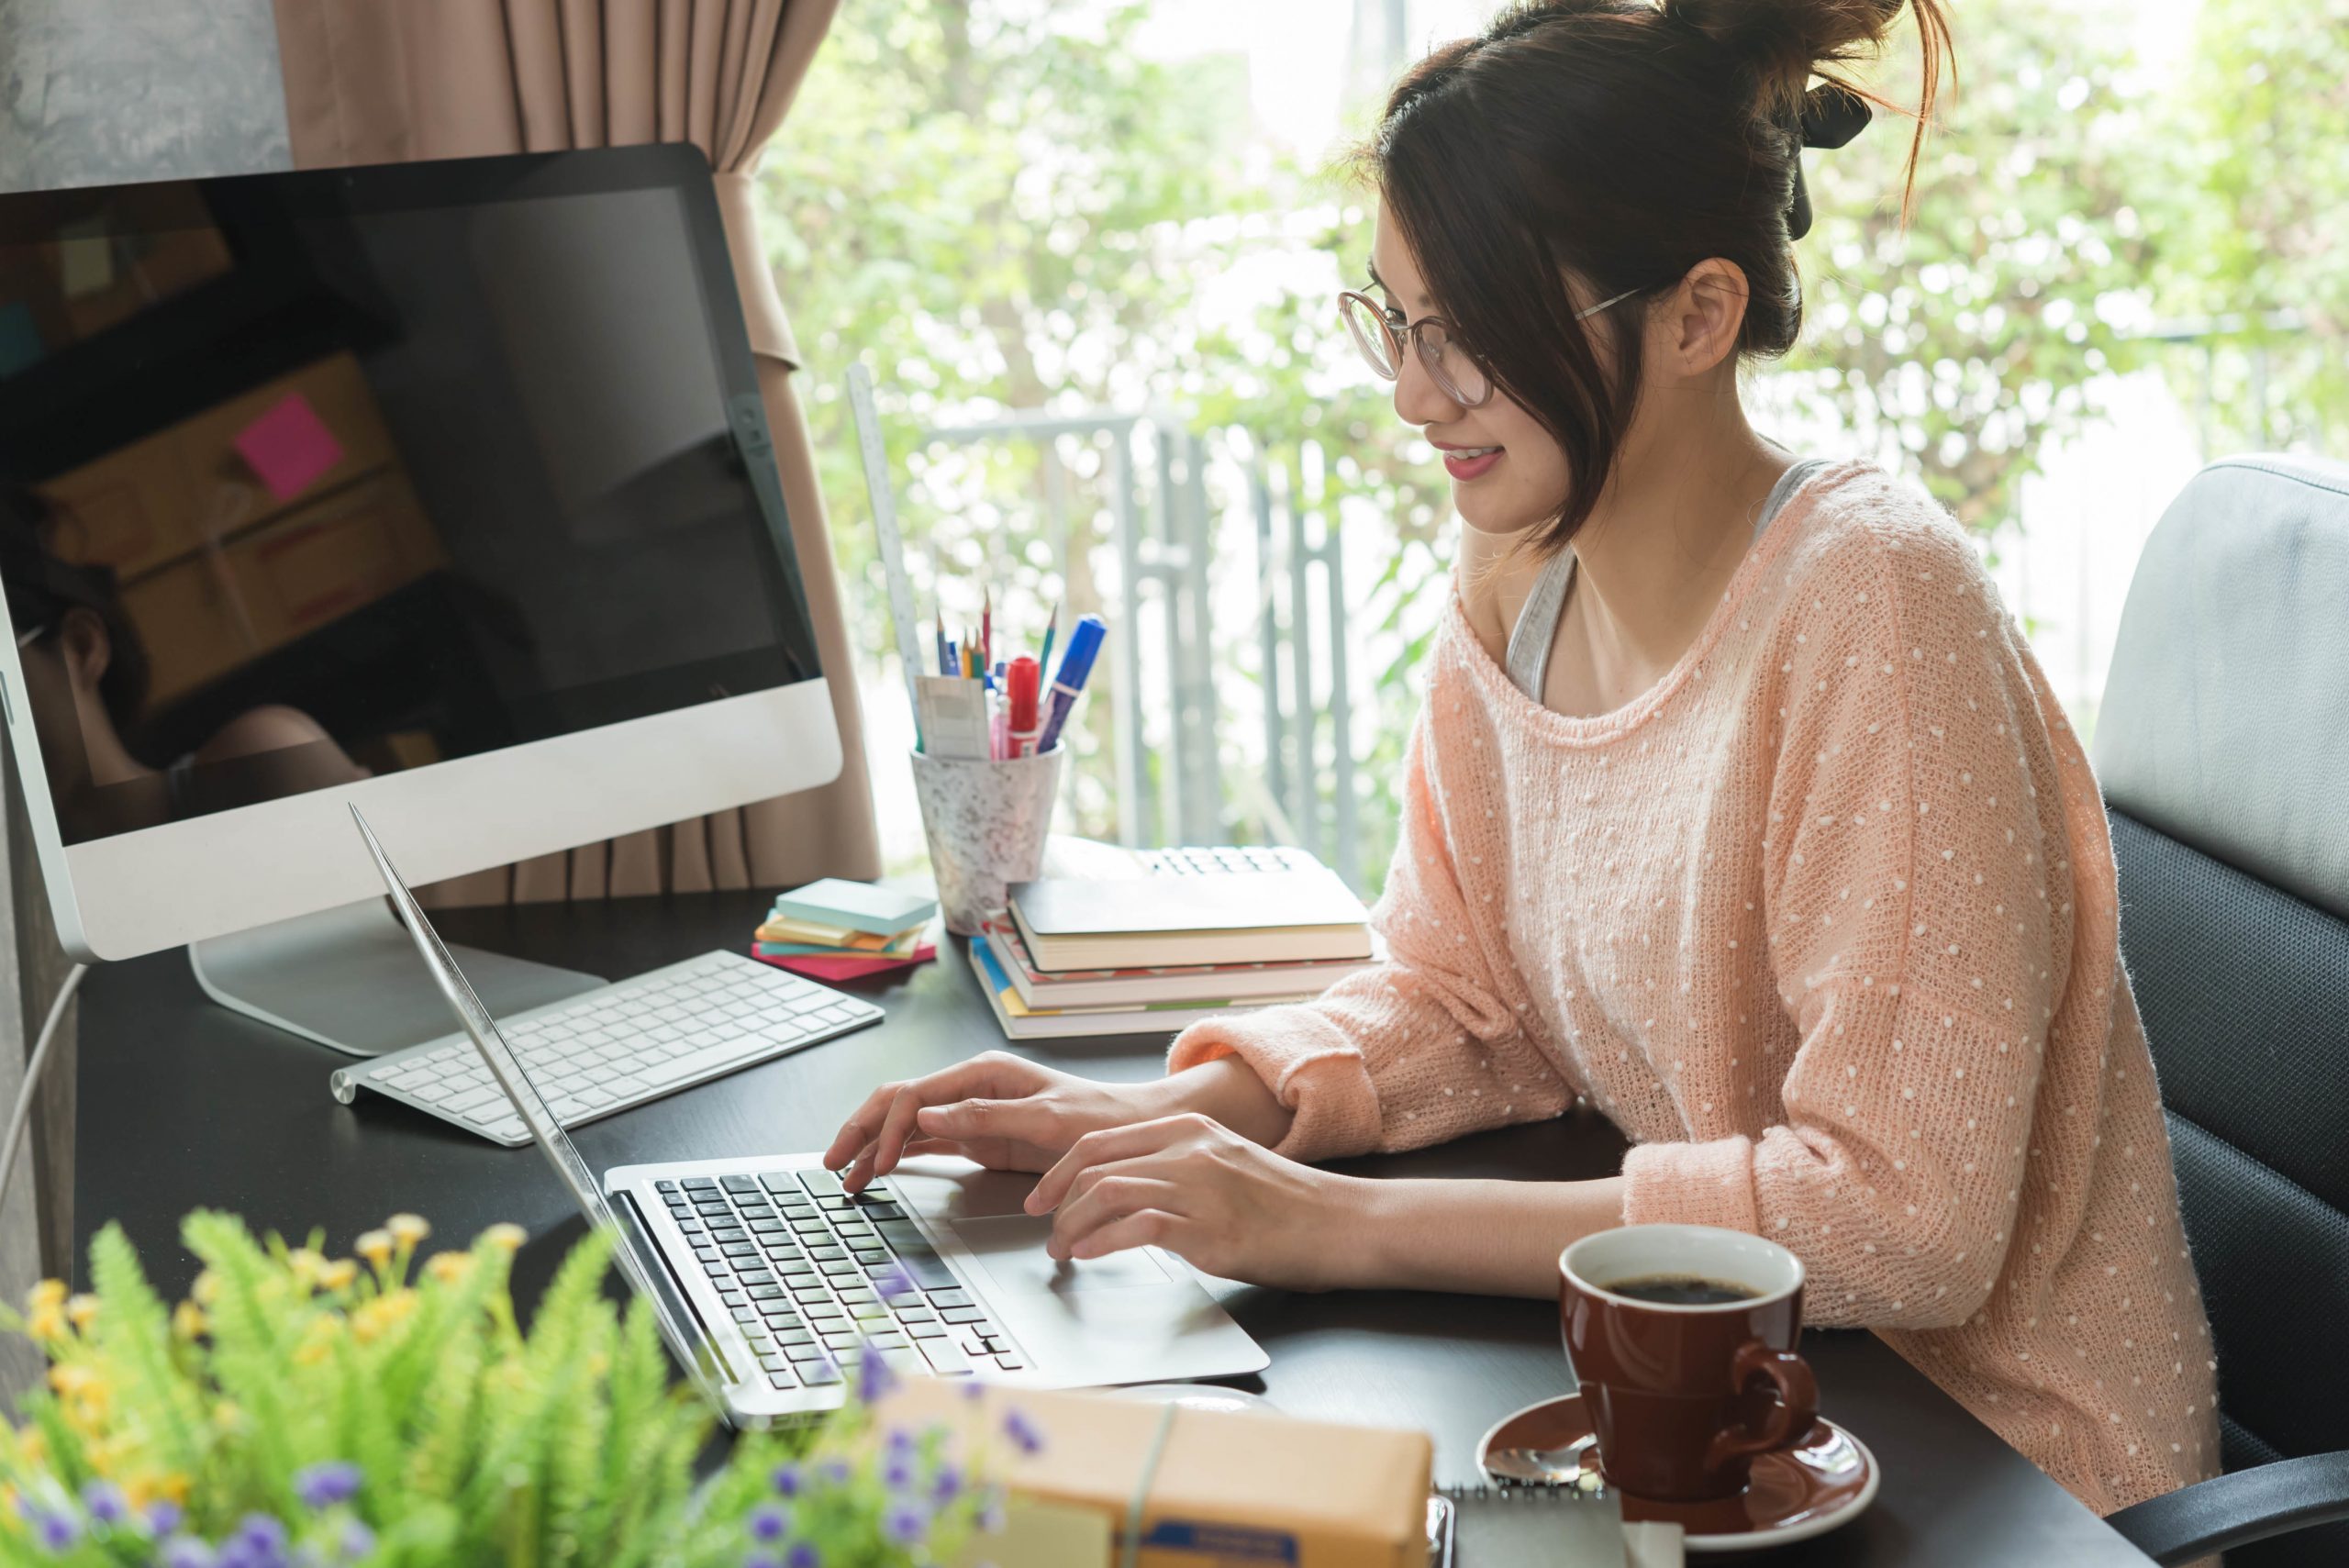 5 Tips to Help You Work Remotely in an Apartment